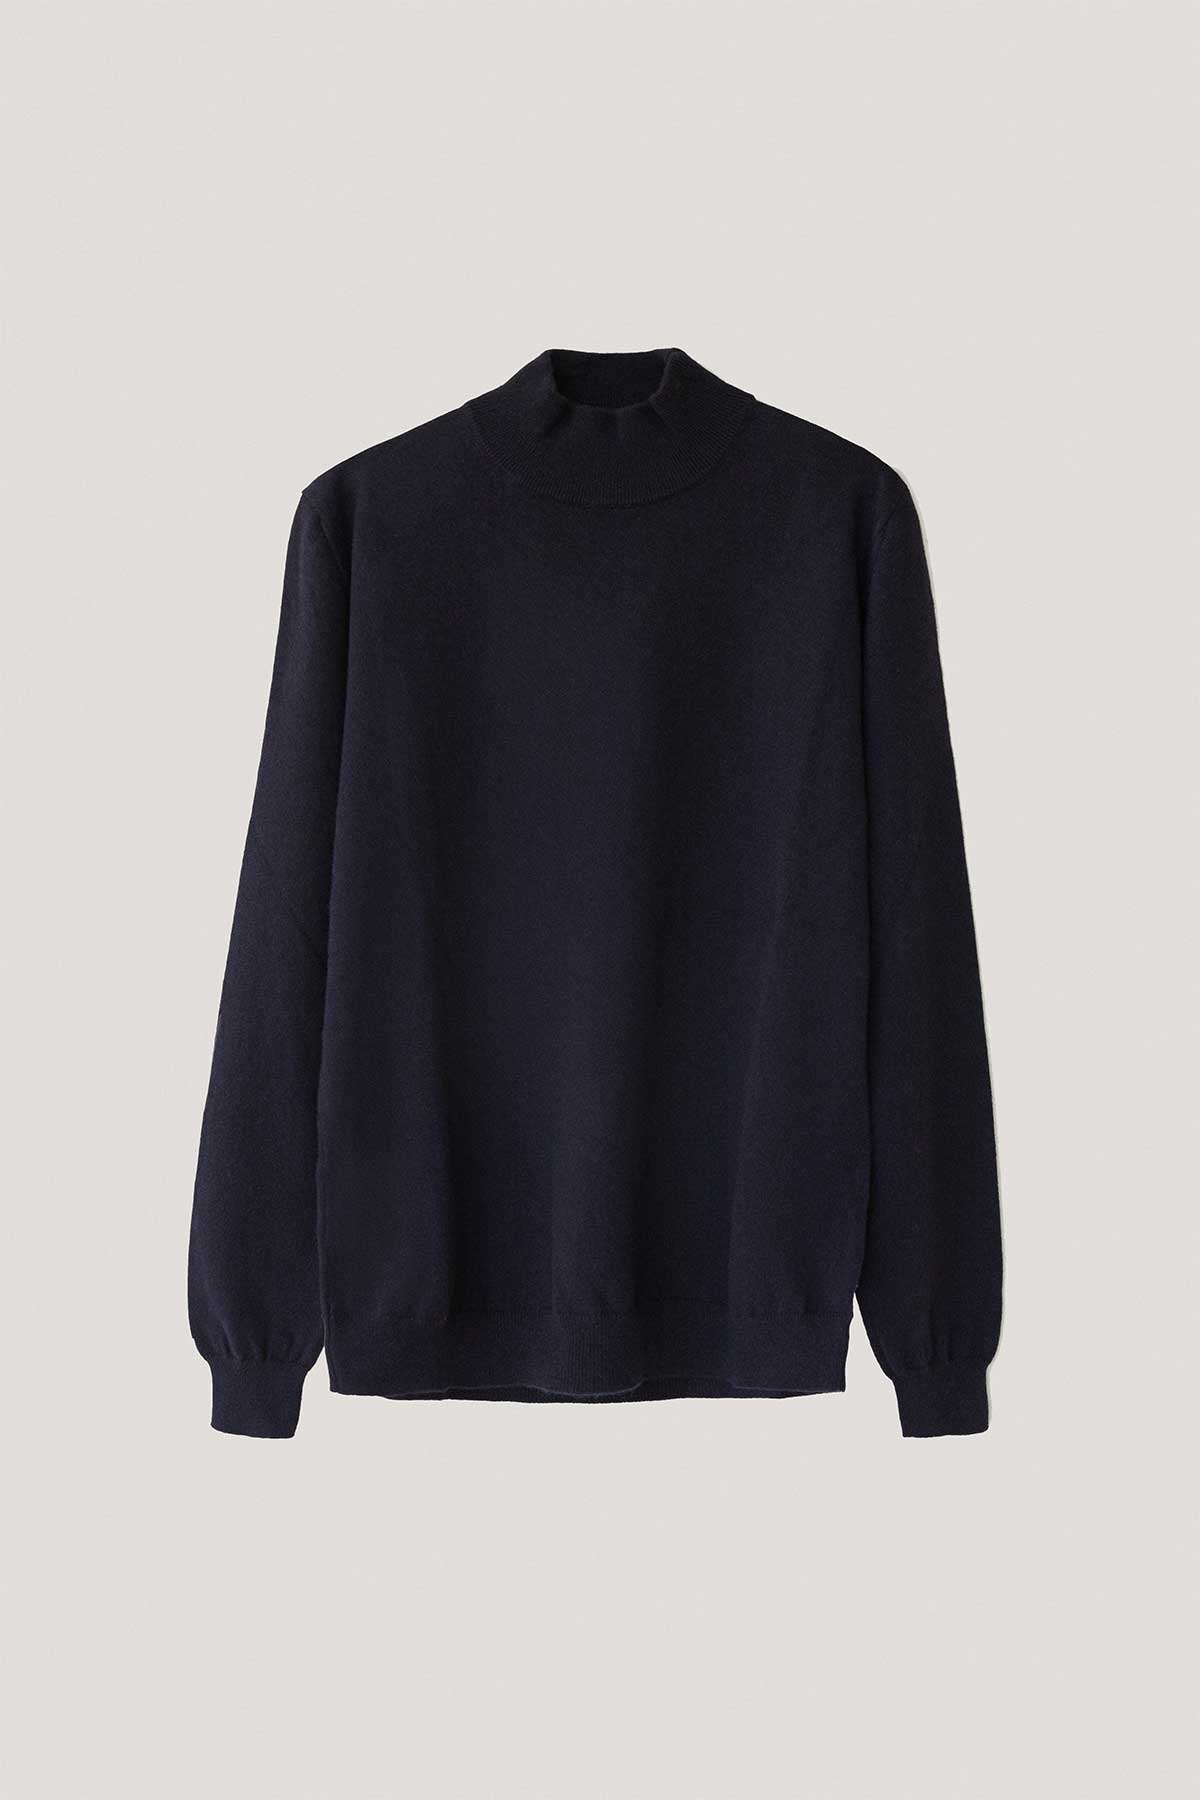 Blue Navy | The High-Neck Cashmere 